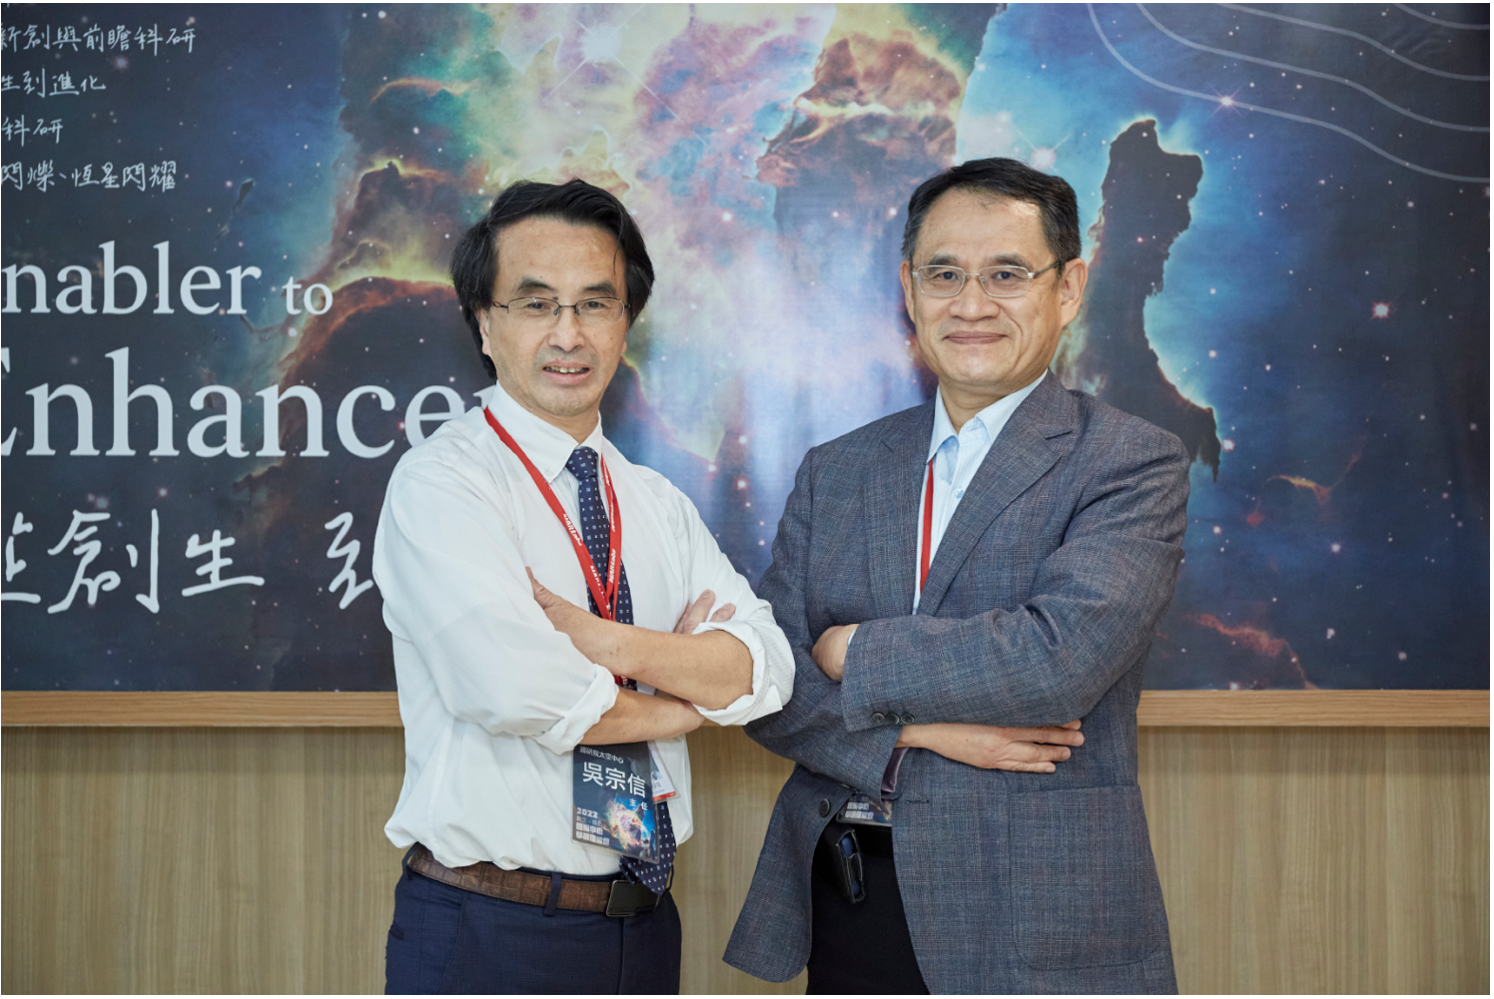 Jong-Shinn Wu, Director General of National Space Organization, and Faa-Jeng Lin, Chairperson of National Applied Research Laboratories warmly expected that National Center for High-performance Computing would have more technical close cooperation with academic circles and industries through its pioneering NCHC Nebula Faculty in the future. 